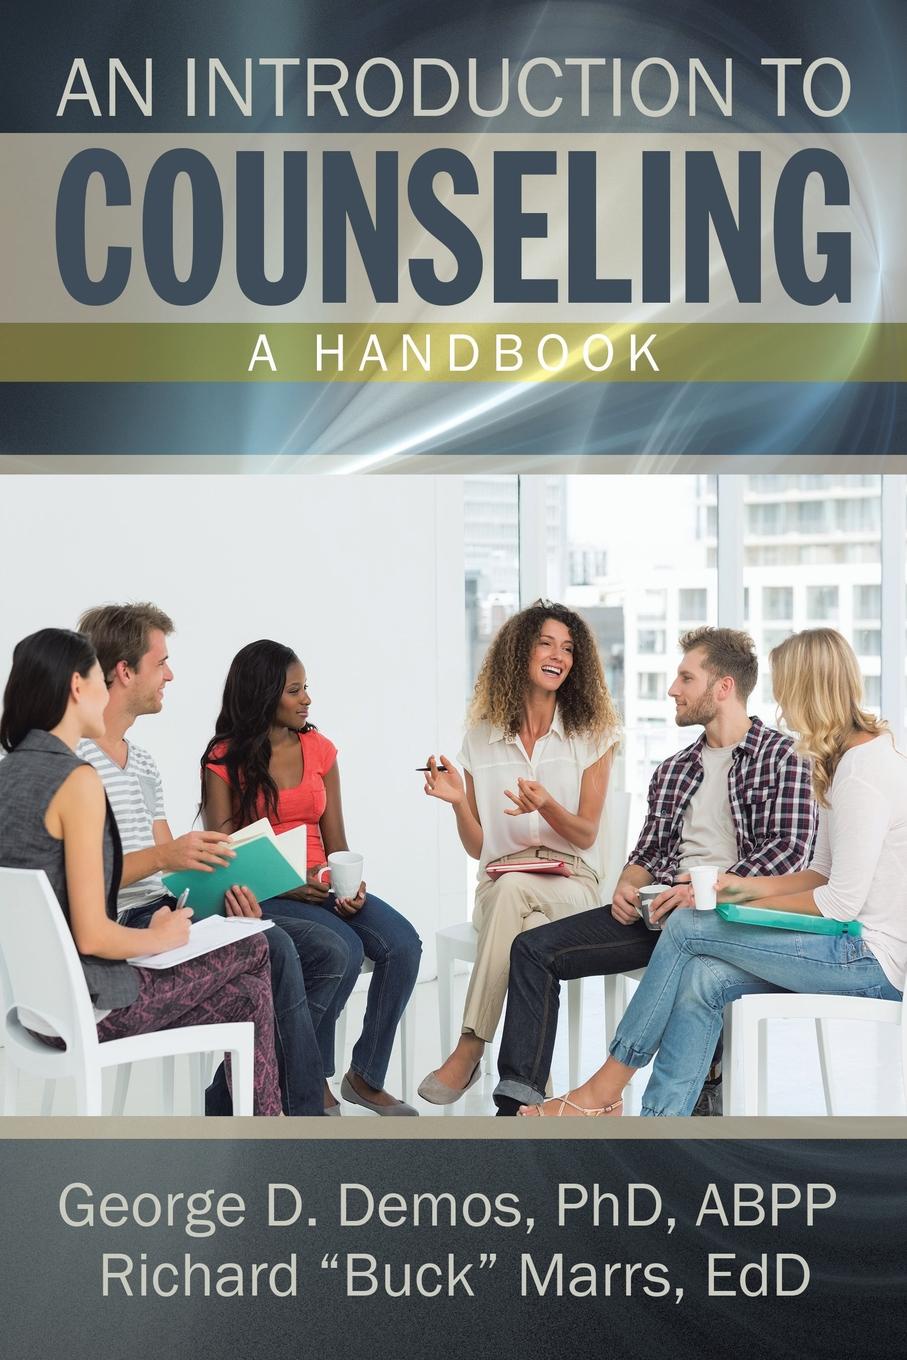 An Introduction to Counseling. A Handbook